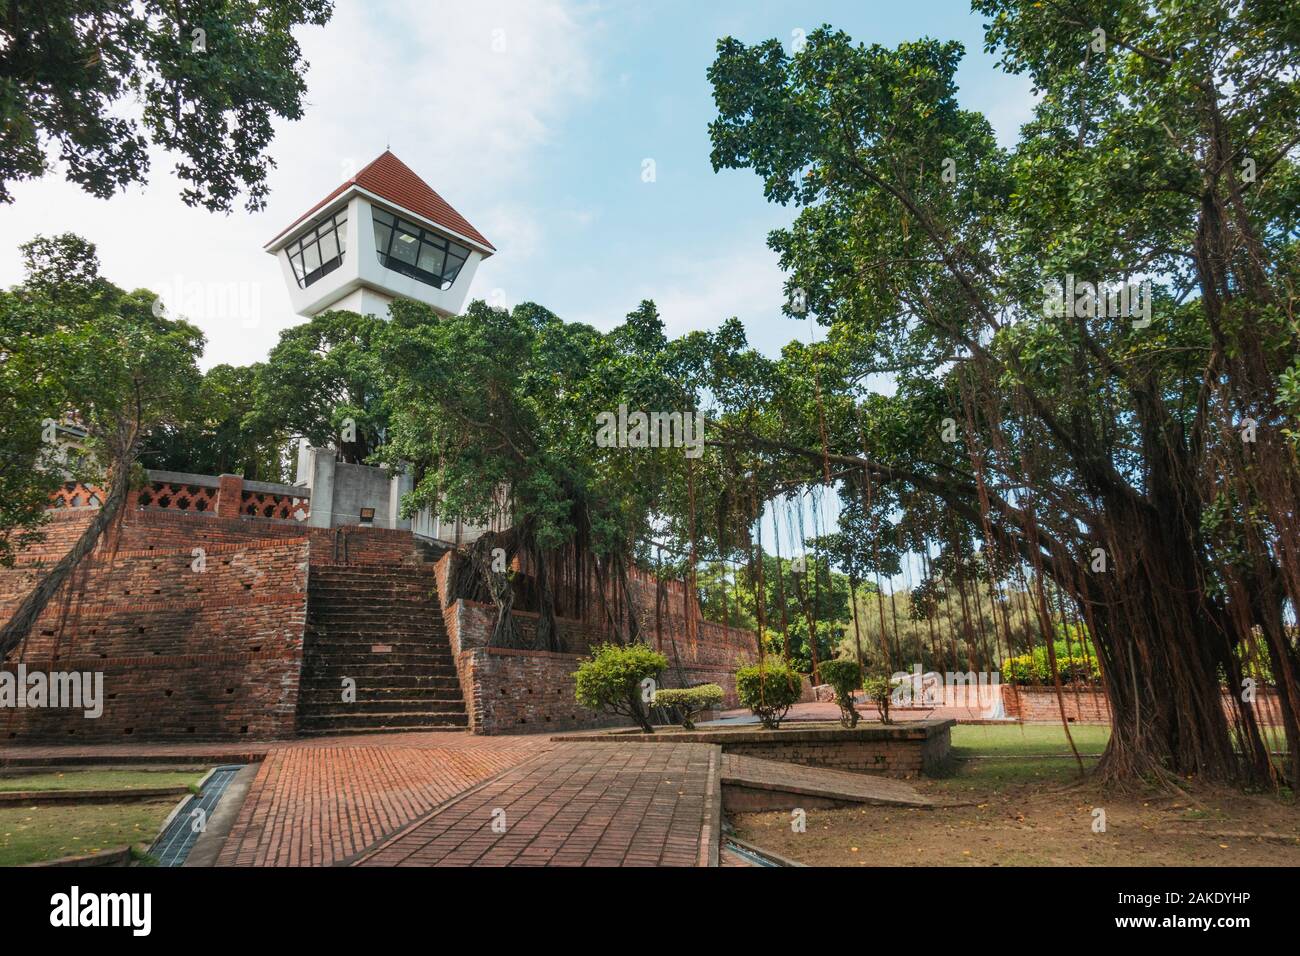 The reconstructed watch tower of Anping Old Fort, a 17th-century fortress built on a peninsula by the Dutch East India Company in Tainan, Taiwan Stock Photo